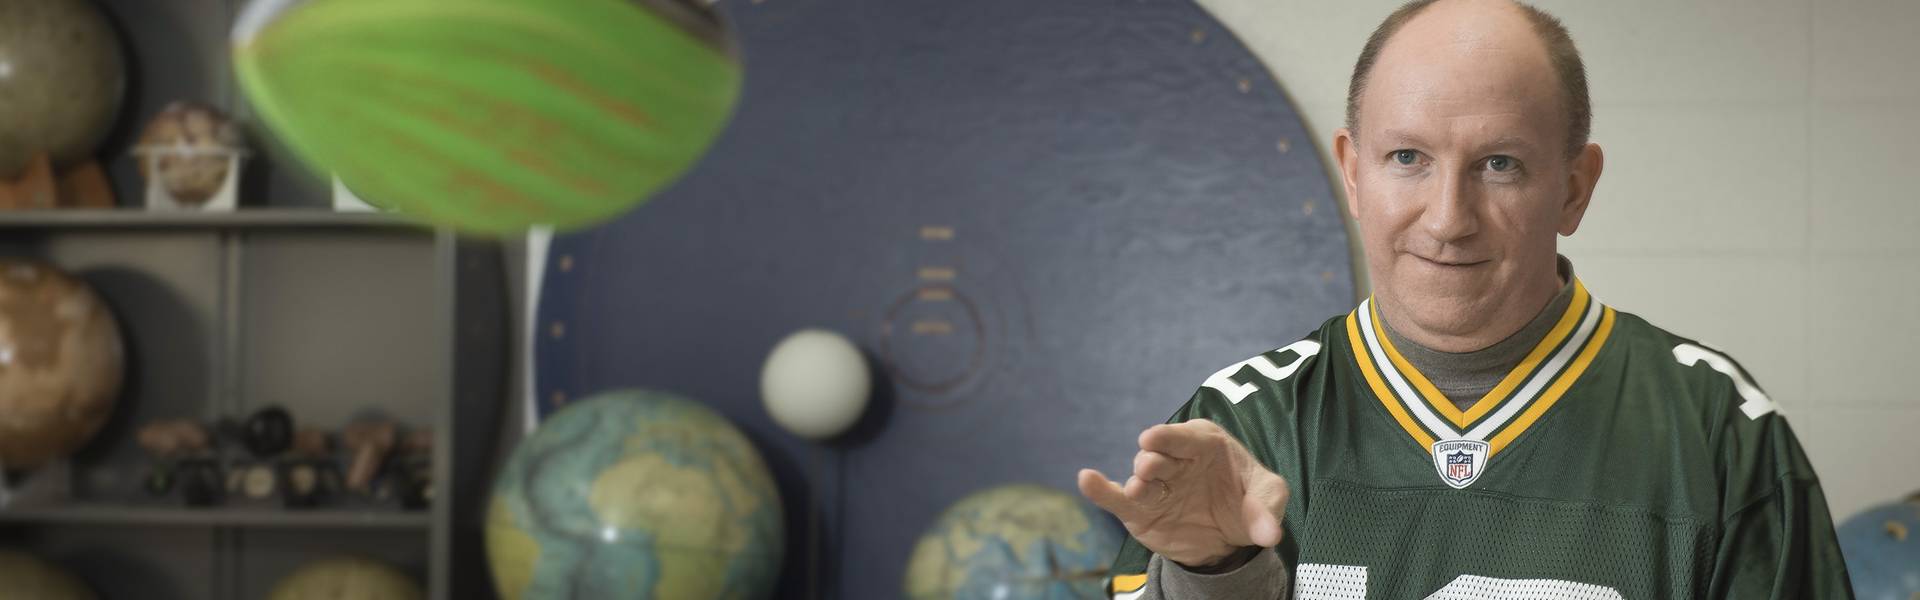 Dr. Erik Hendrickson throws a foam football while wearing a Green Bay Packers jersey.